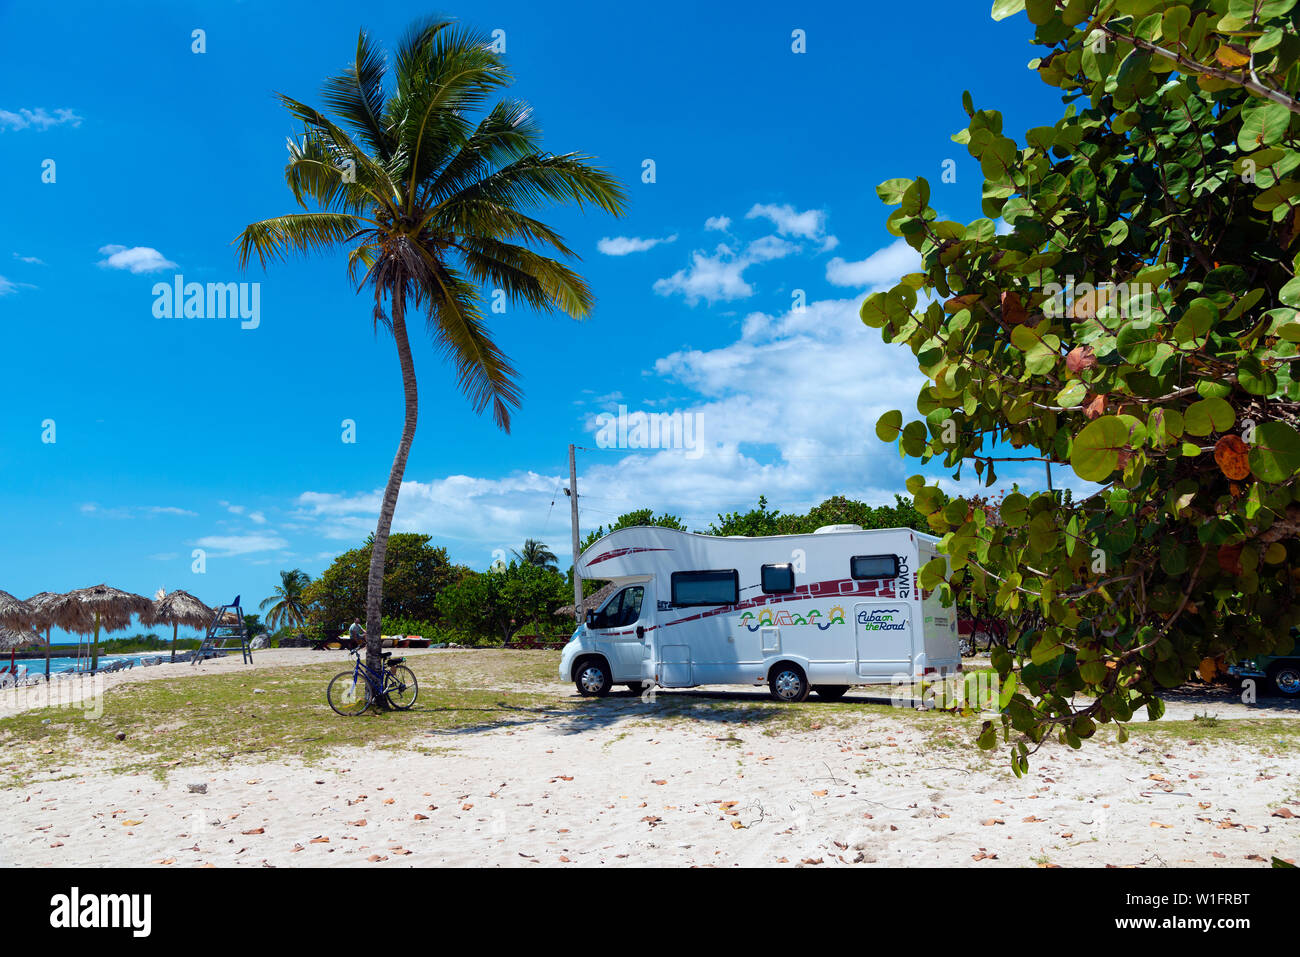 Motorhome parked on beach at Playa Coco part of Playa Giron a beautiful white sand beach with turquoise sea in Pinar del Rio Province, Cuba, Caribbean Stock Photo